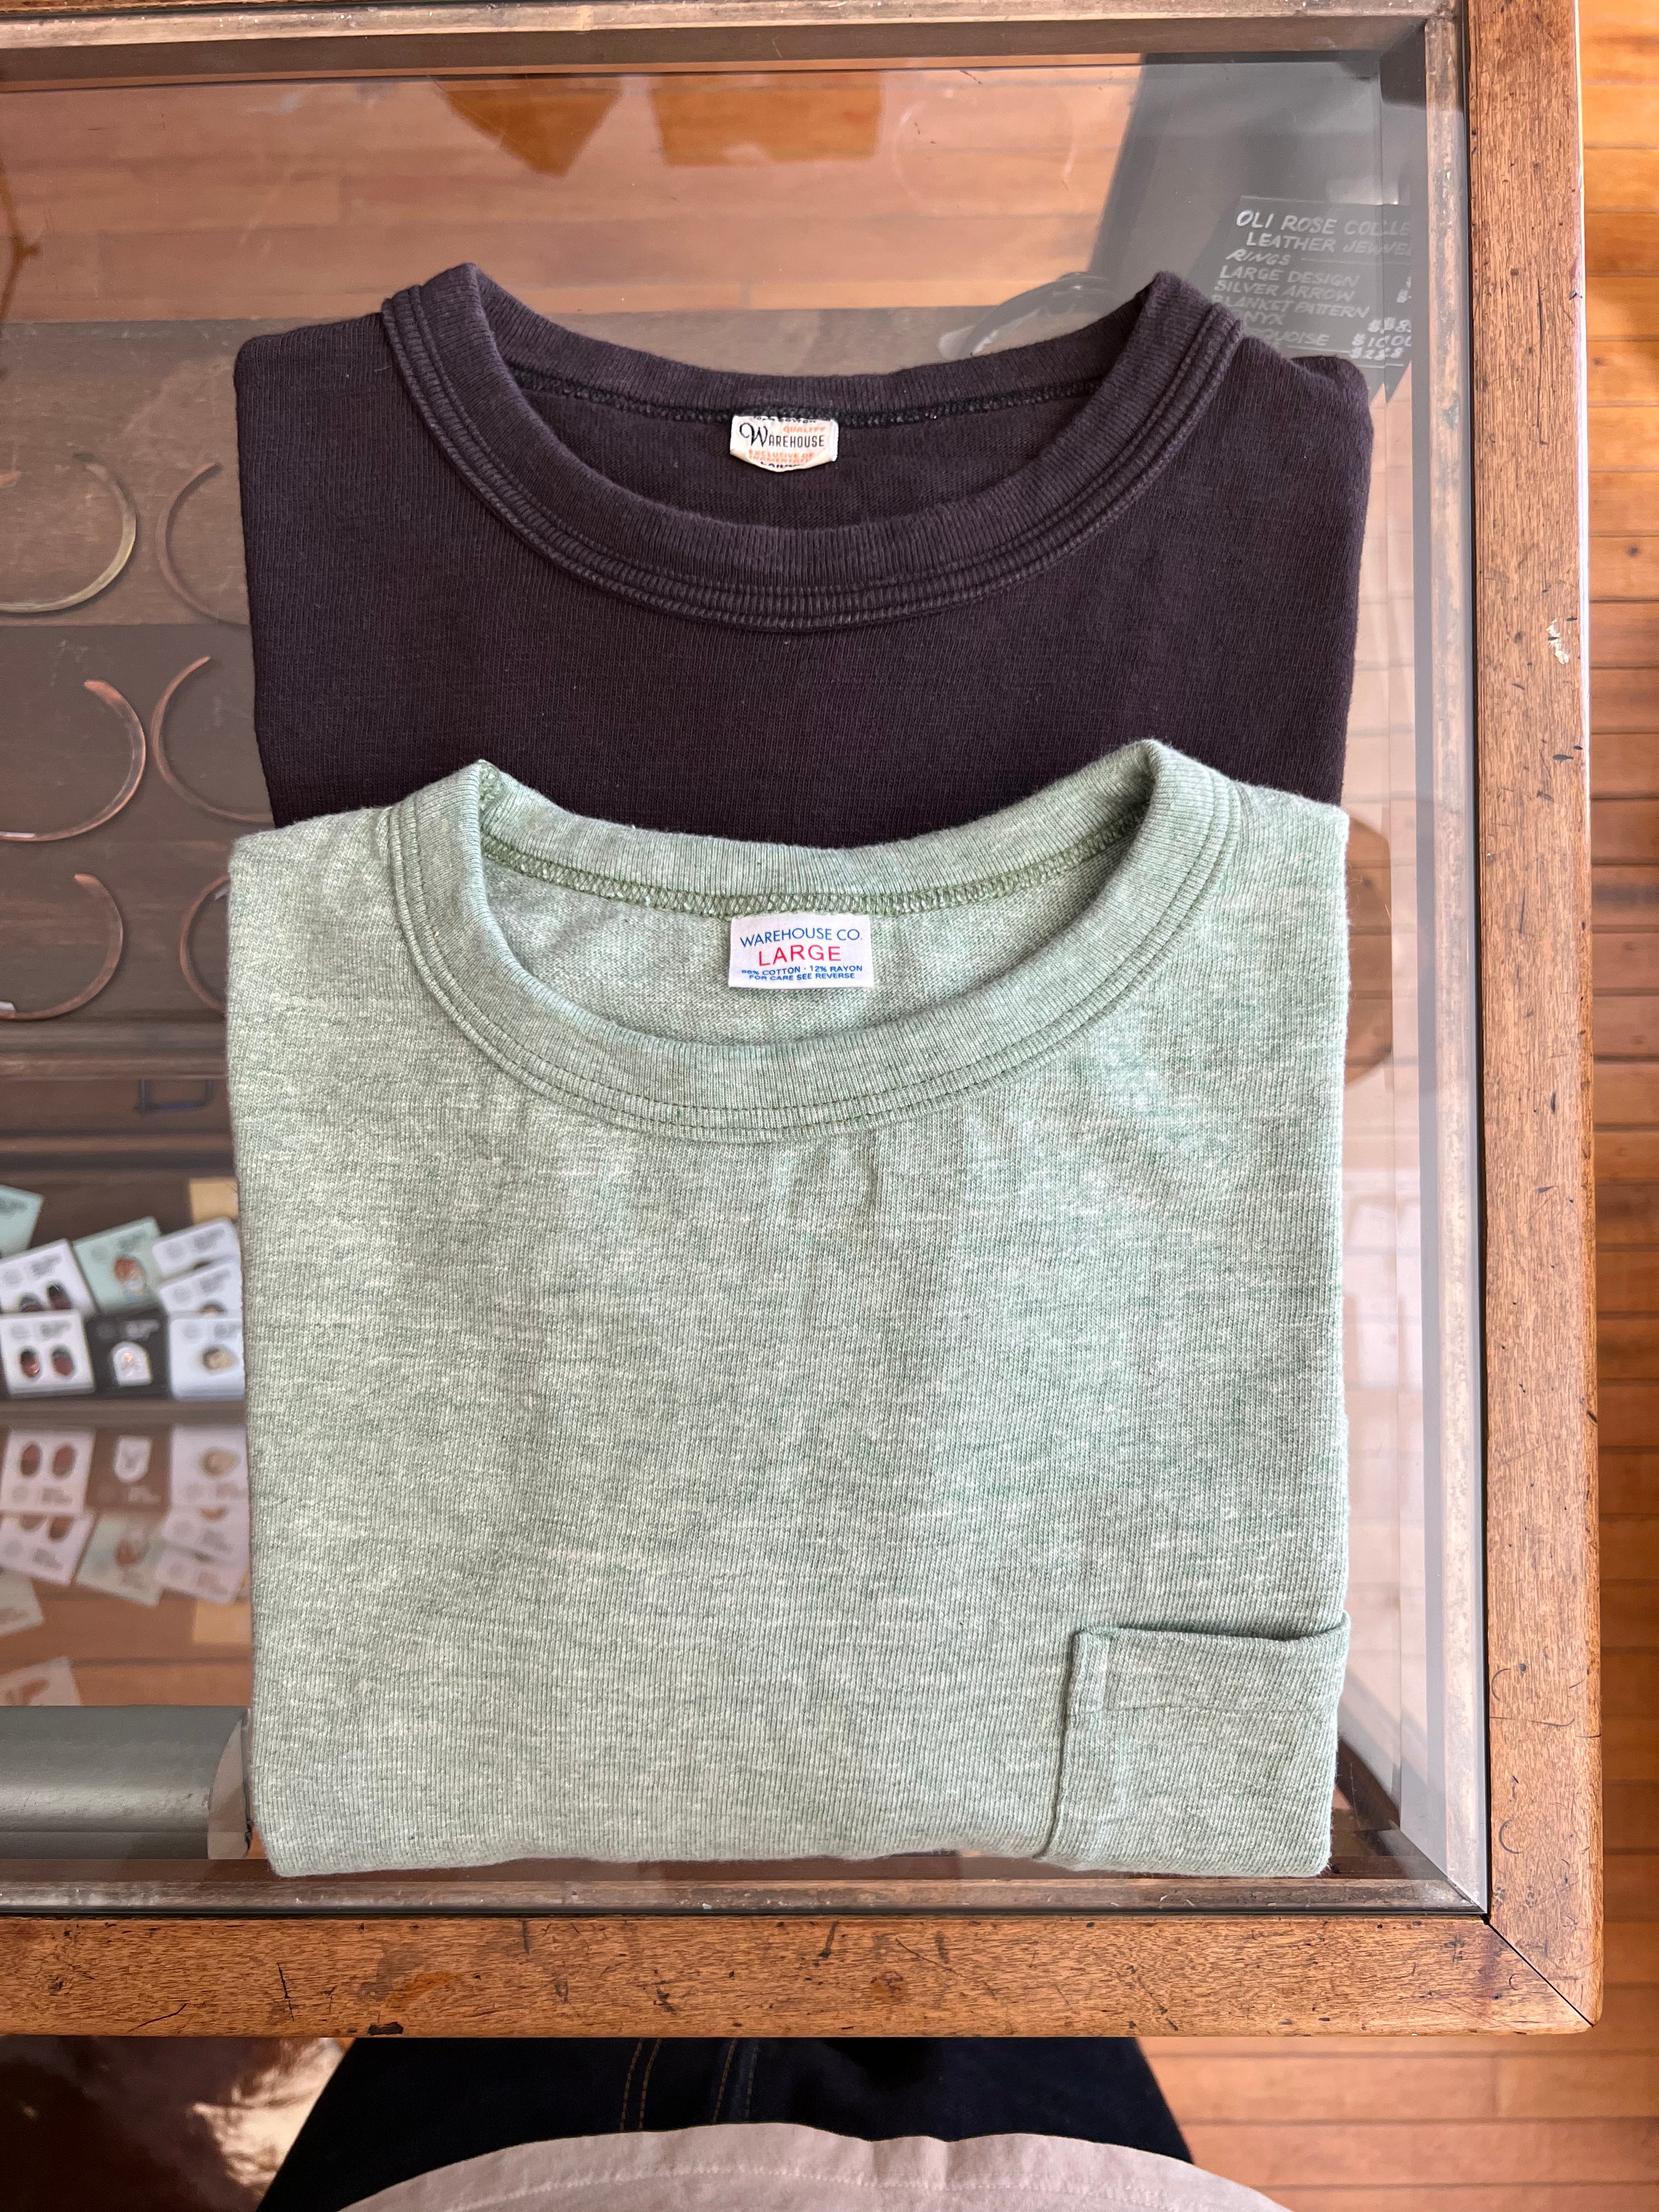 Gently Used Warehouse & Co. T-shirt 2 Pack - Large - Green Heather & Sumikuro